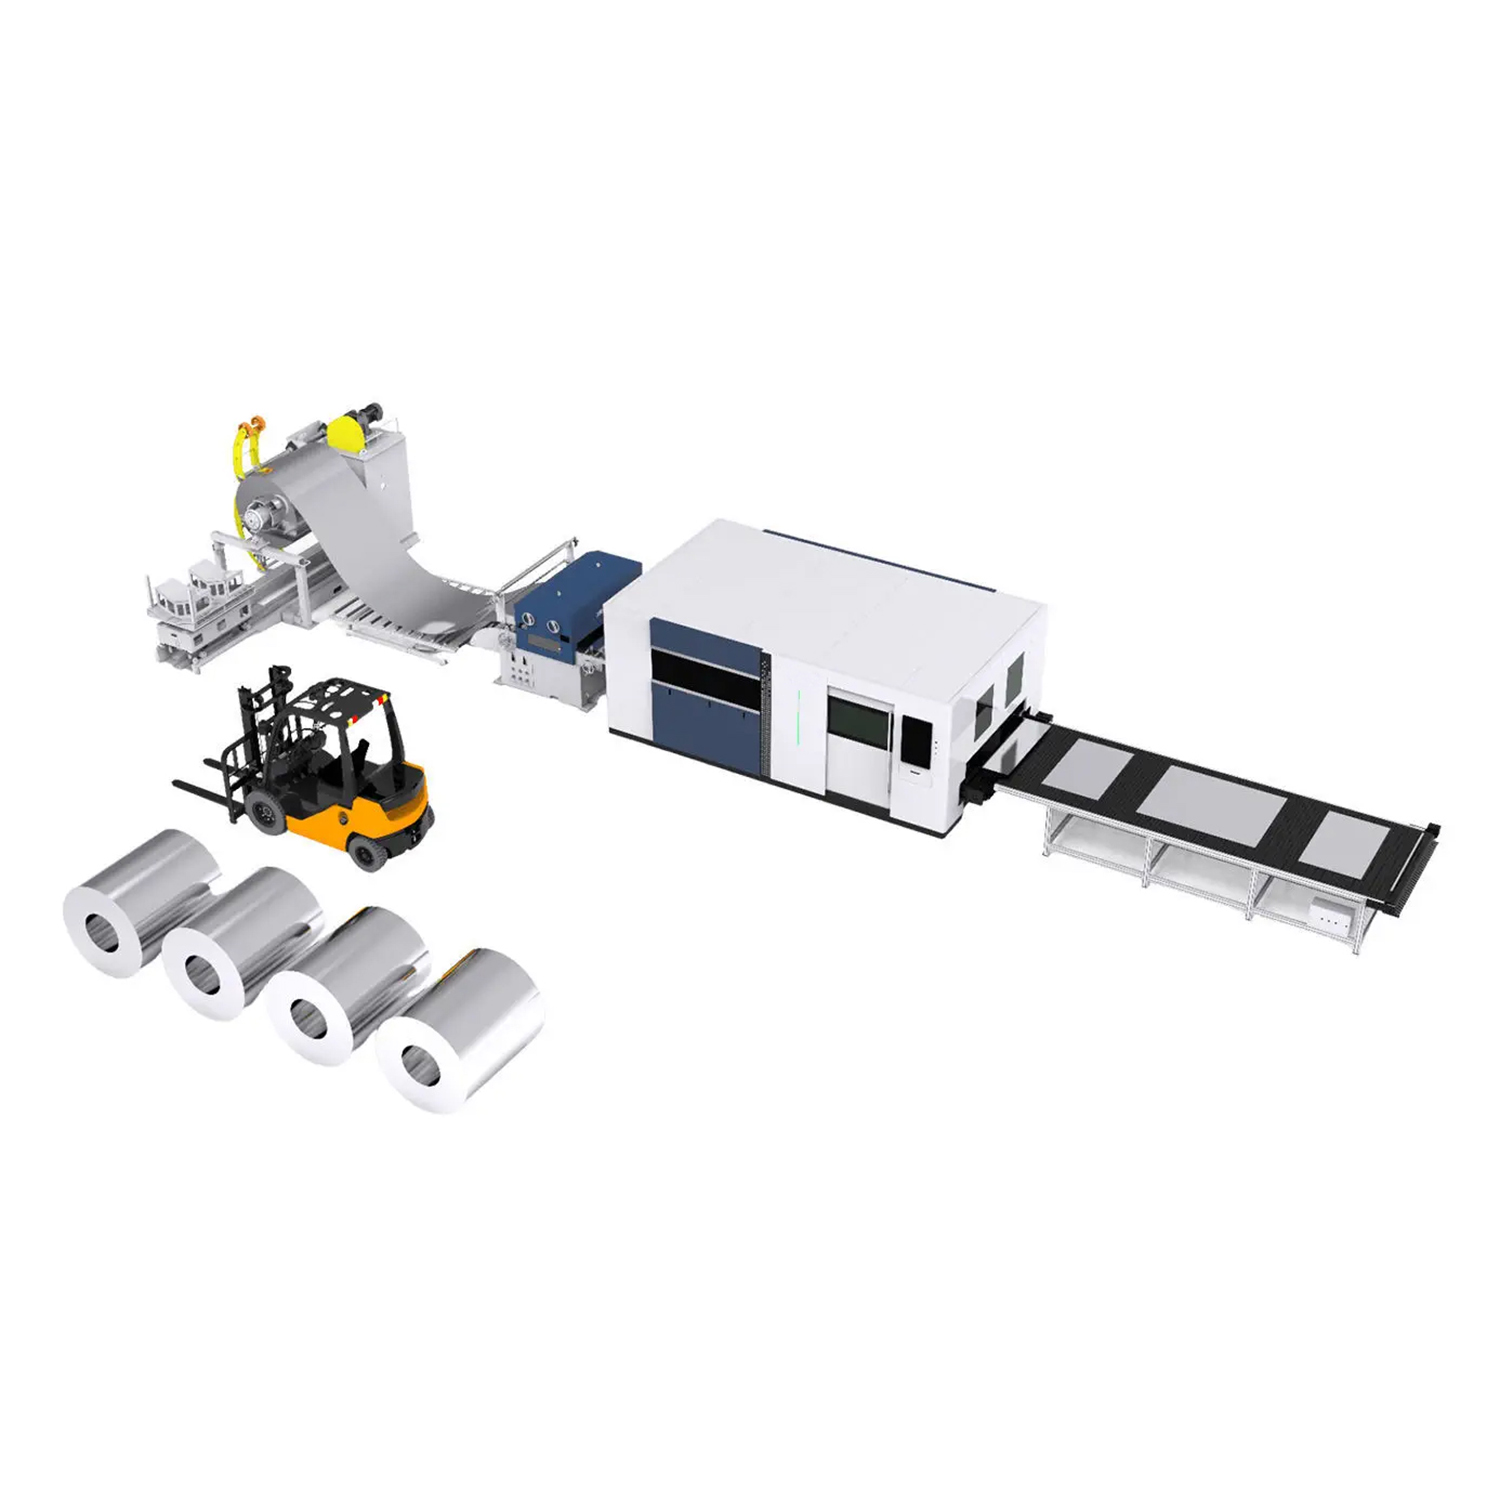 Full-automatic ADV SL Coil Fed Laser Cutting Machine with Uncoiler and Leveler